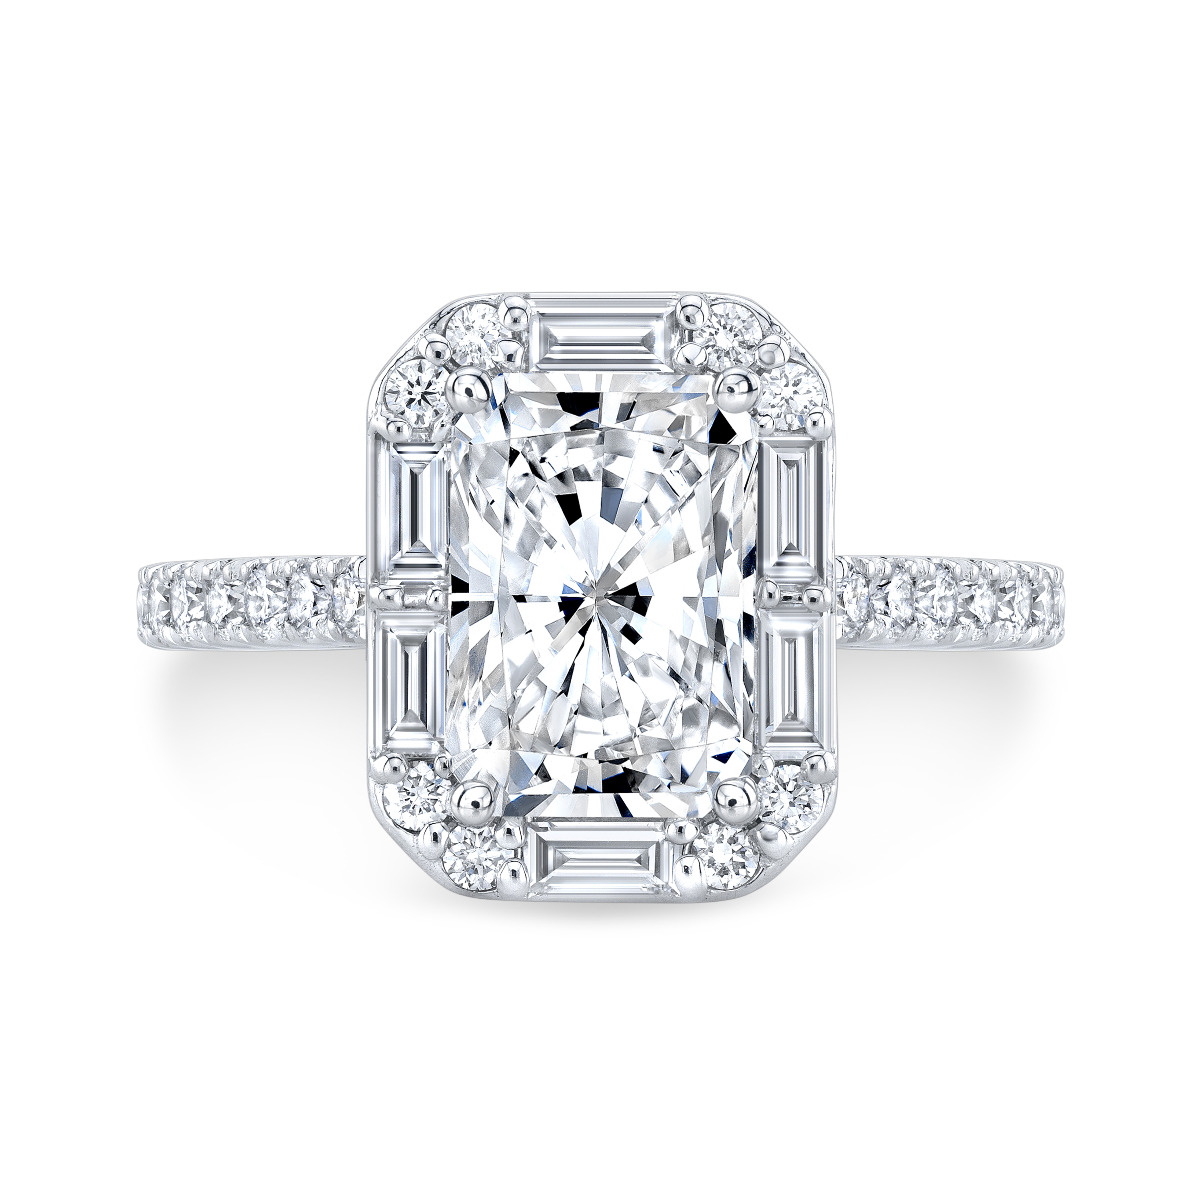 In front view, this engagement ring features stunning Baguette and Pave Diamonds on the halo setting.  